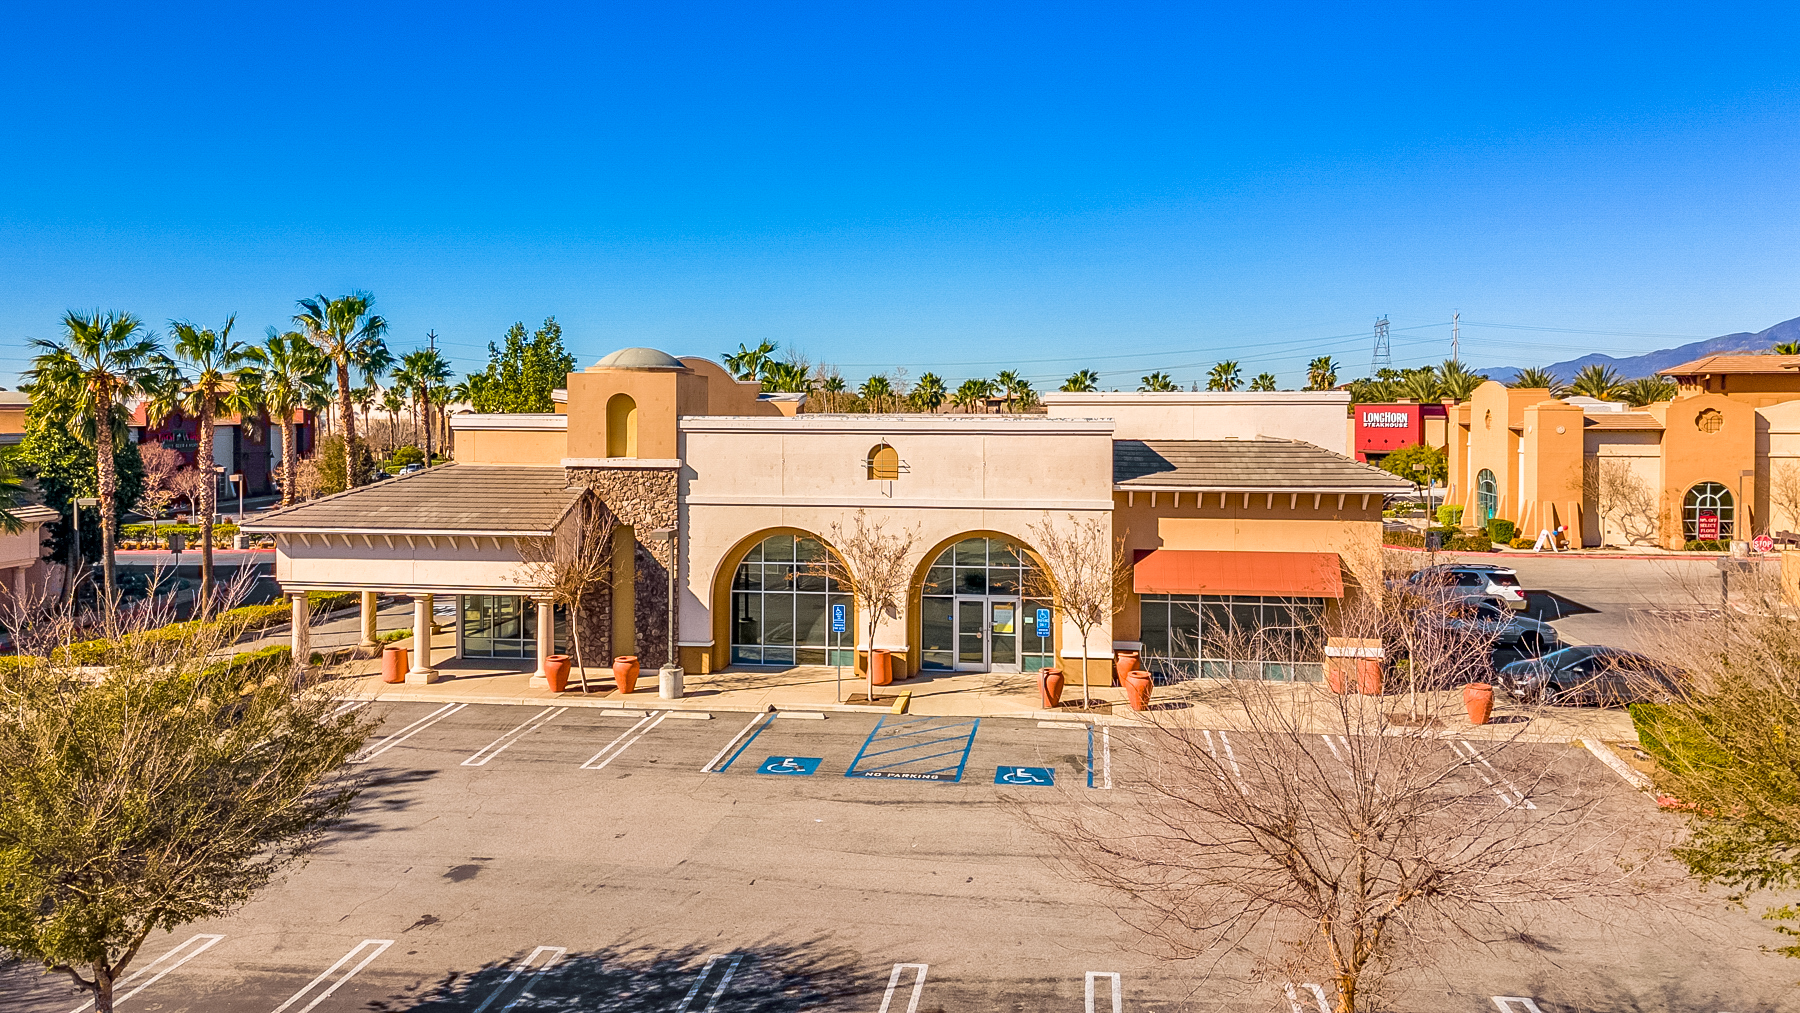 Greg Bedell and Paul Su of Progressive Real Estate Partners Arrange $2.2M Sale of Freestanding Building Across from Victoria Gardens in Rancho Cucamonga, CA